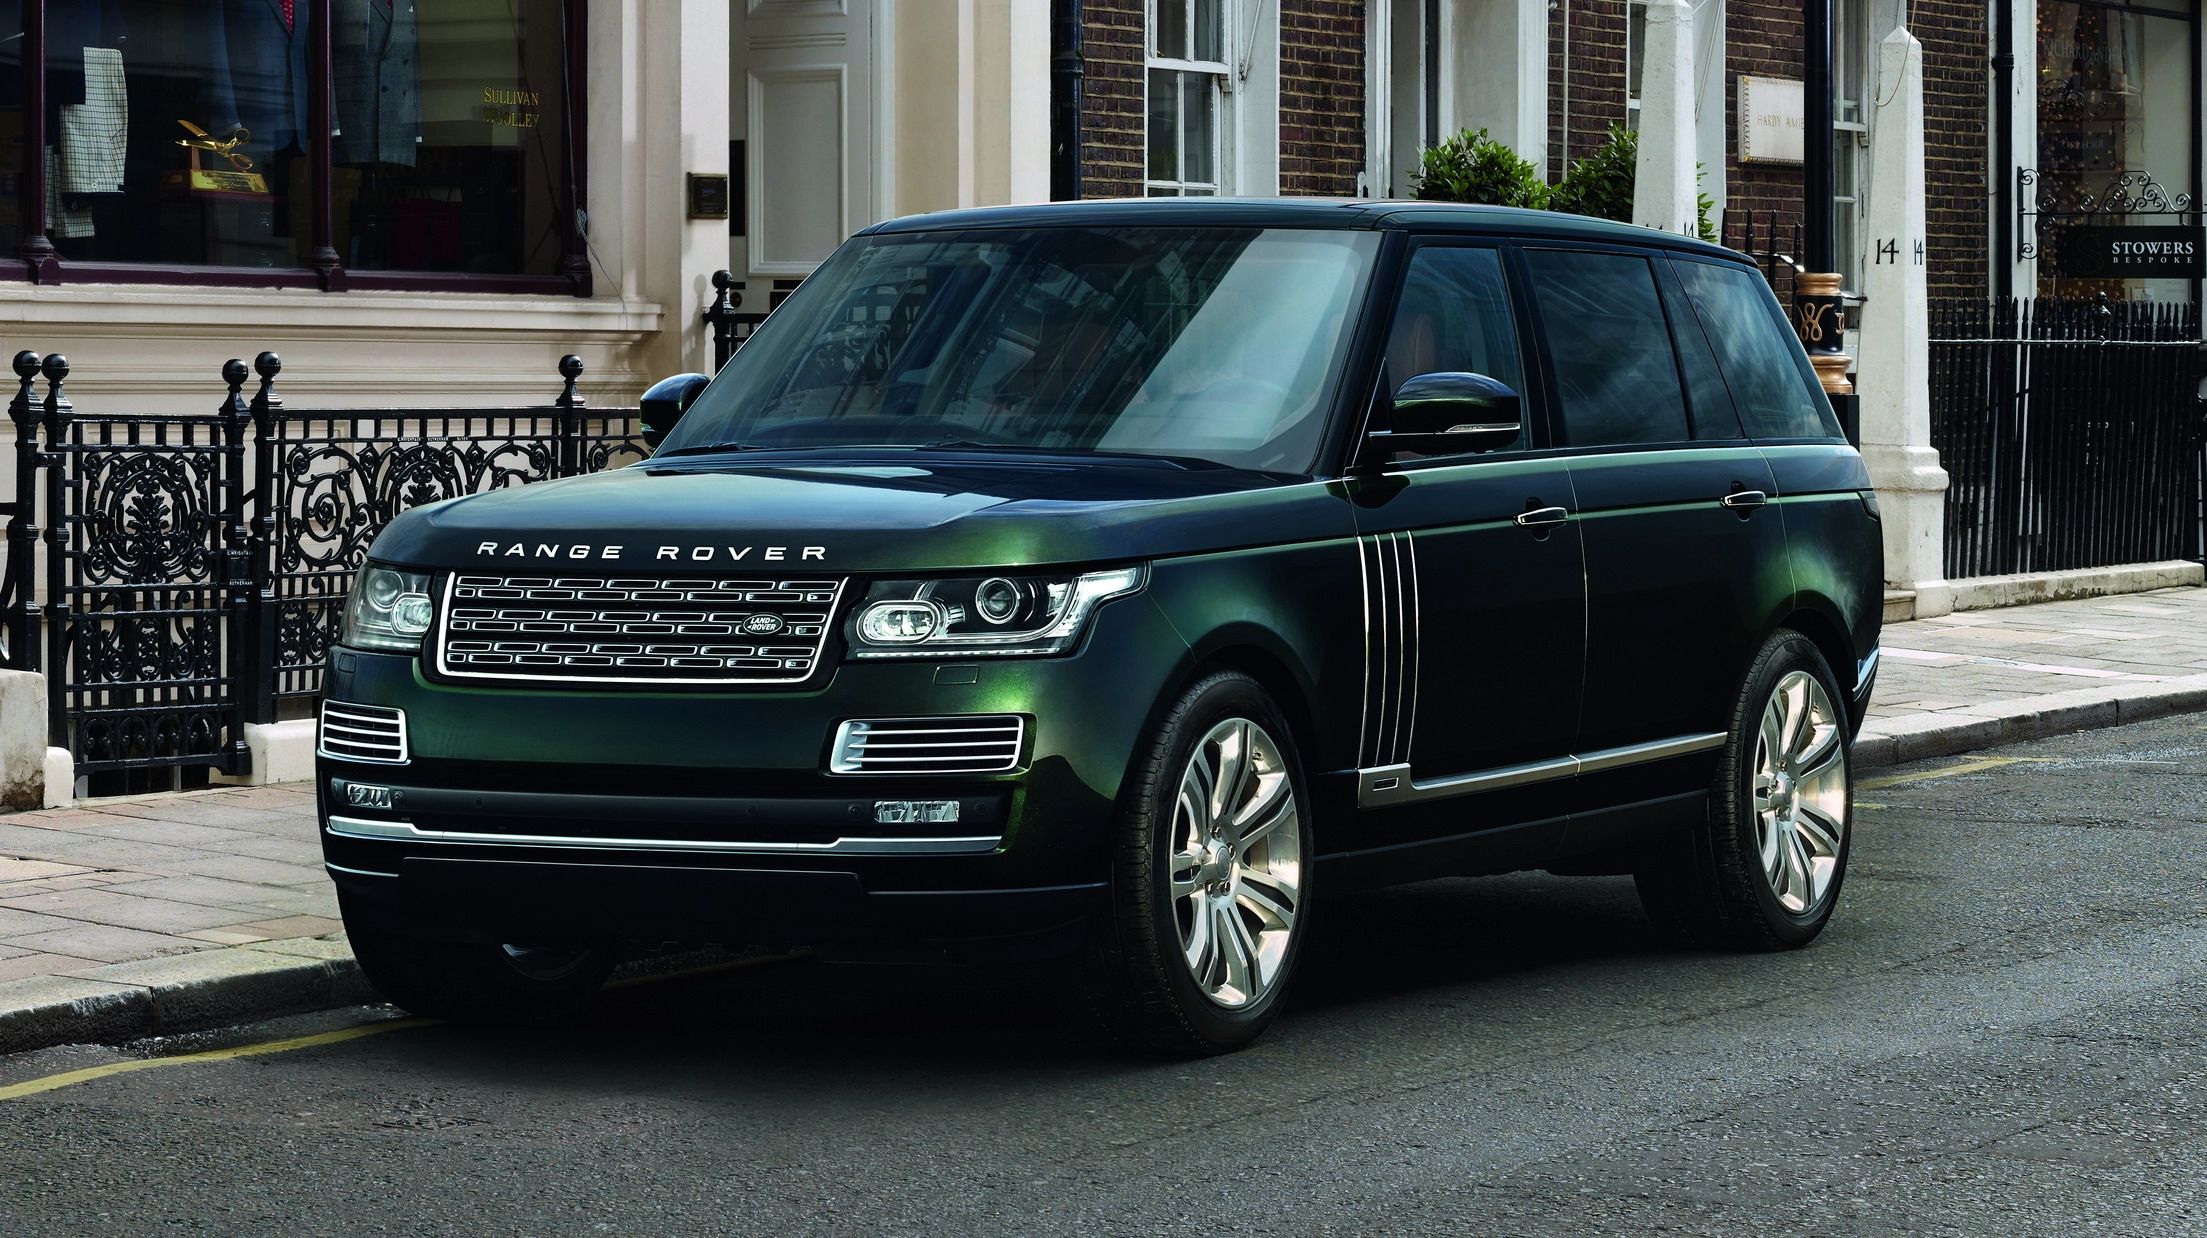  Meet the Land Rover Range Rover SVO Holland & Holland Special Edition, AKA the most expensive Range Rover to date. 